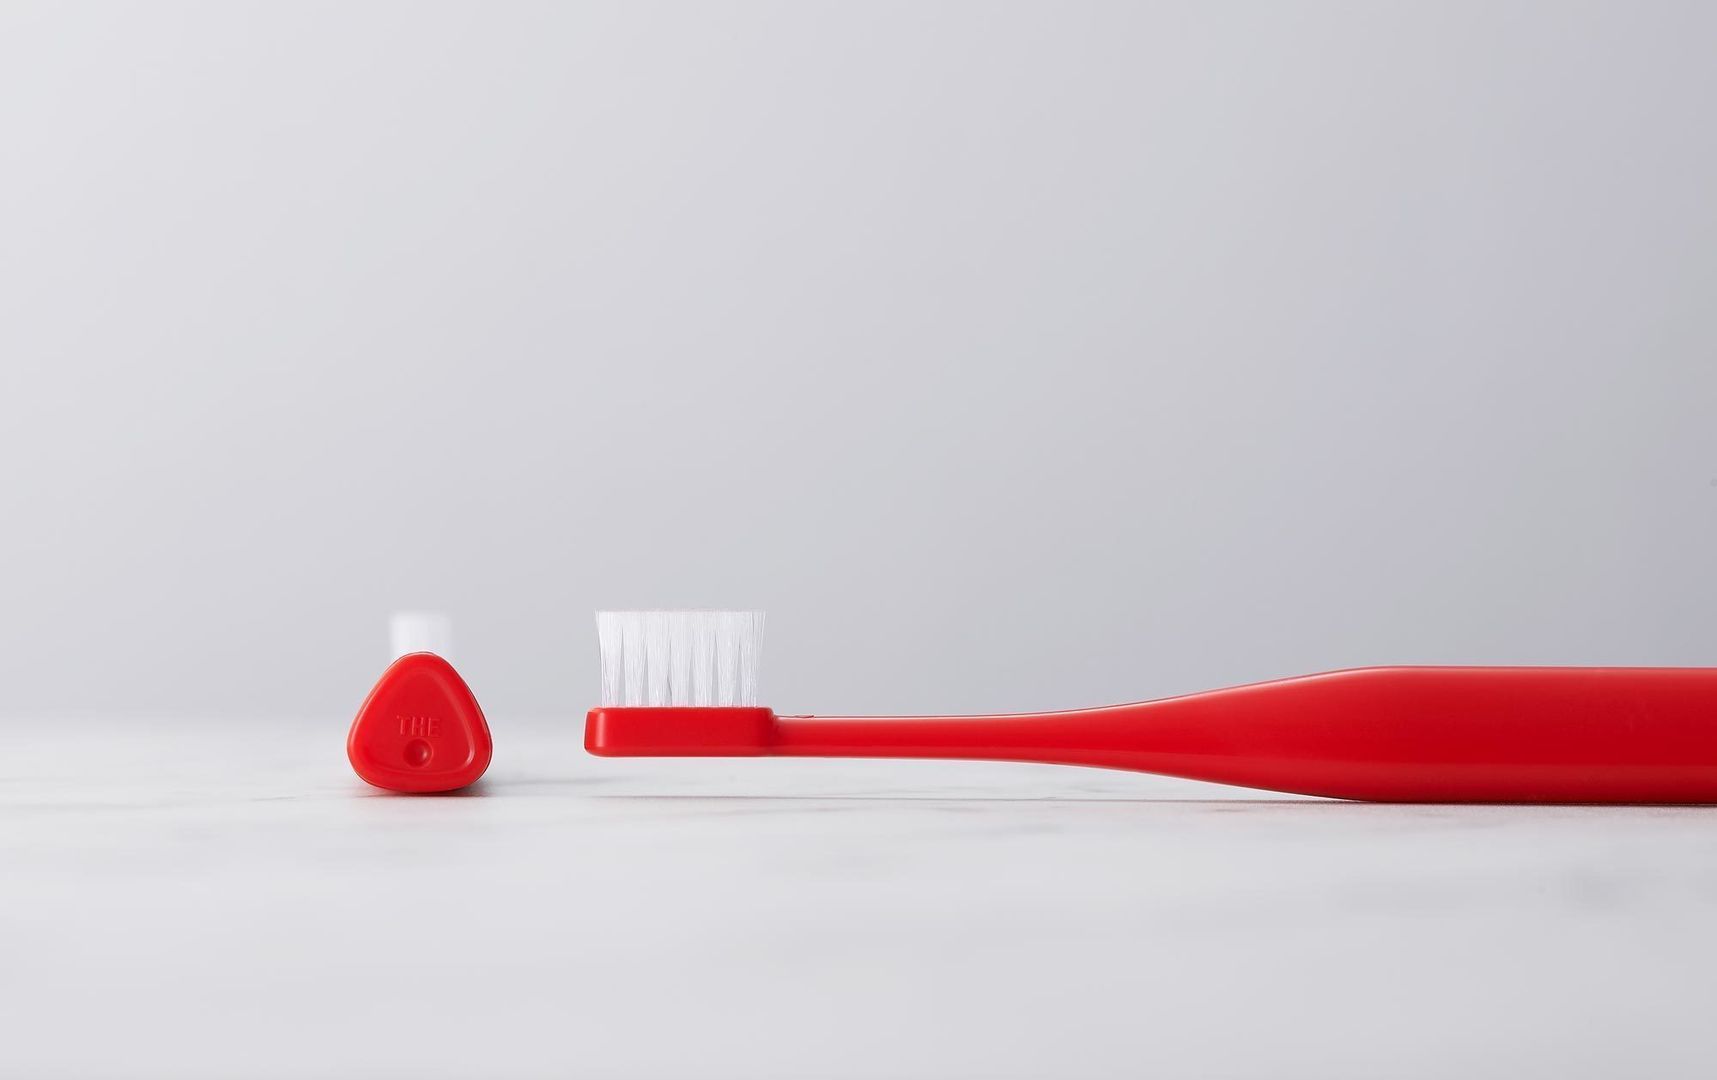 ​“THE TOOTHBRUSH BY MISOKA”, the standing toothbrush, PRODUCT DESIGN CENTER PRODUCT DESIGN CENTER 인더스트리얼 욕실 싱크